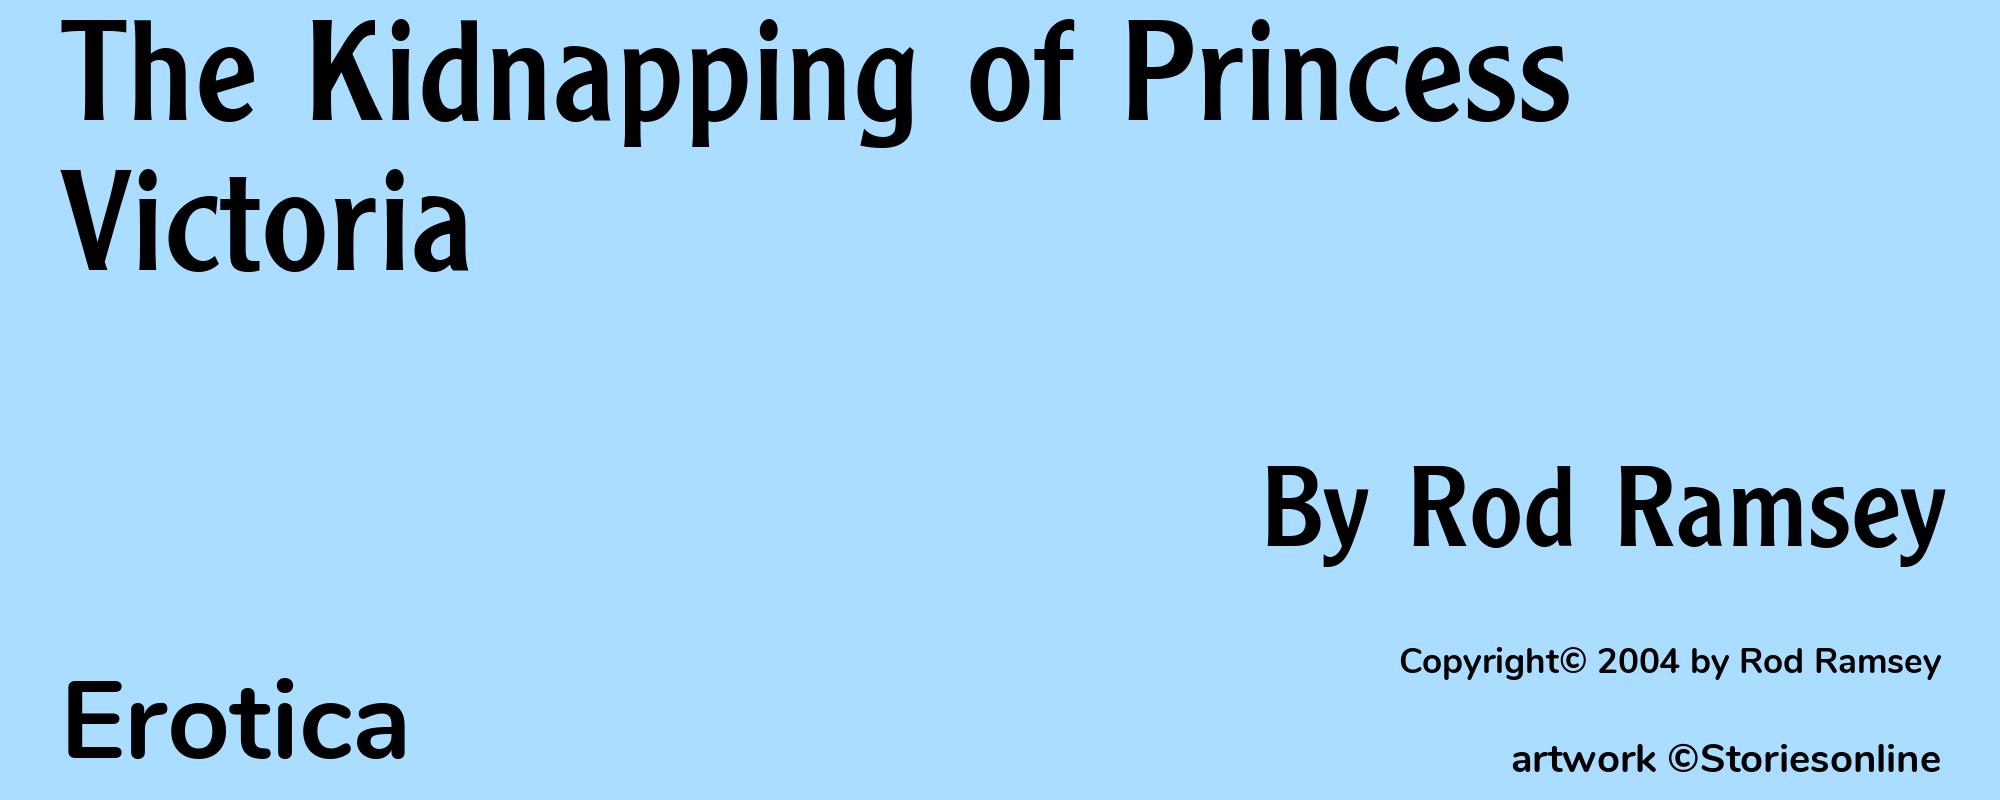 The Kidnapping of Princess Victoria - Cover